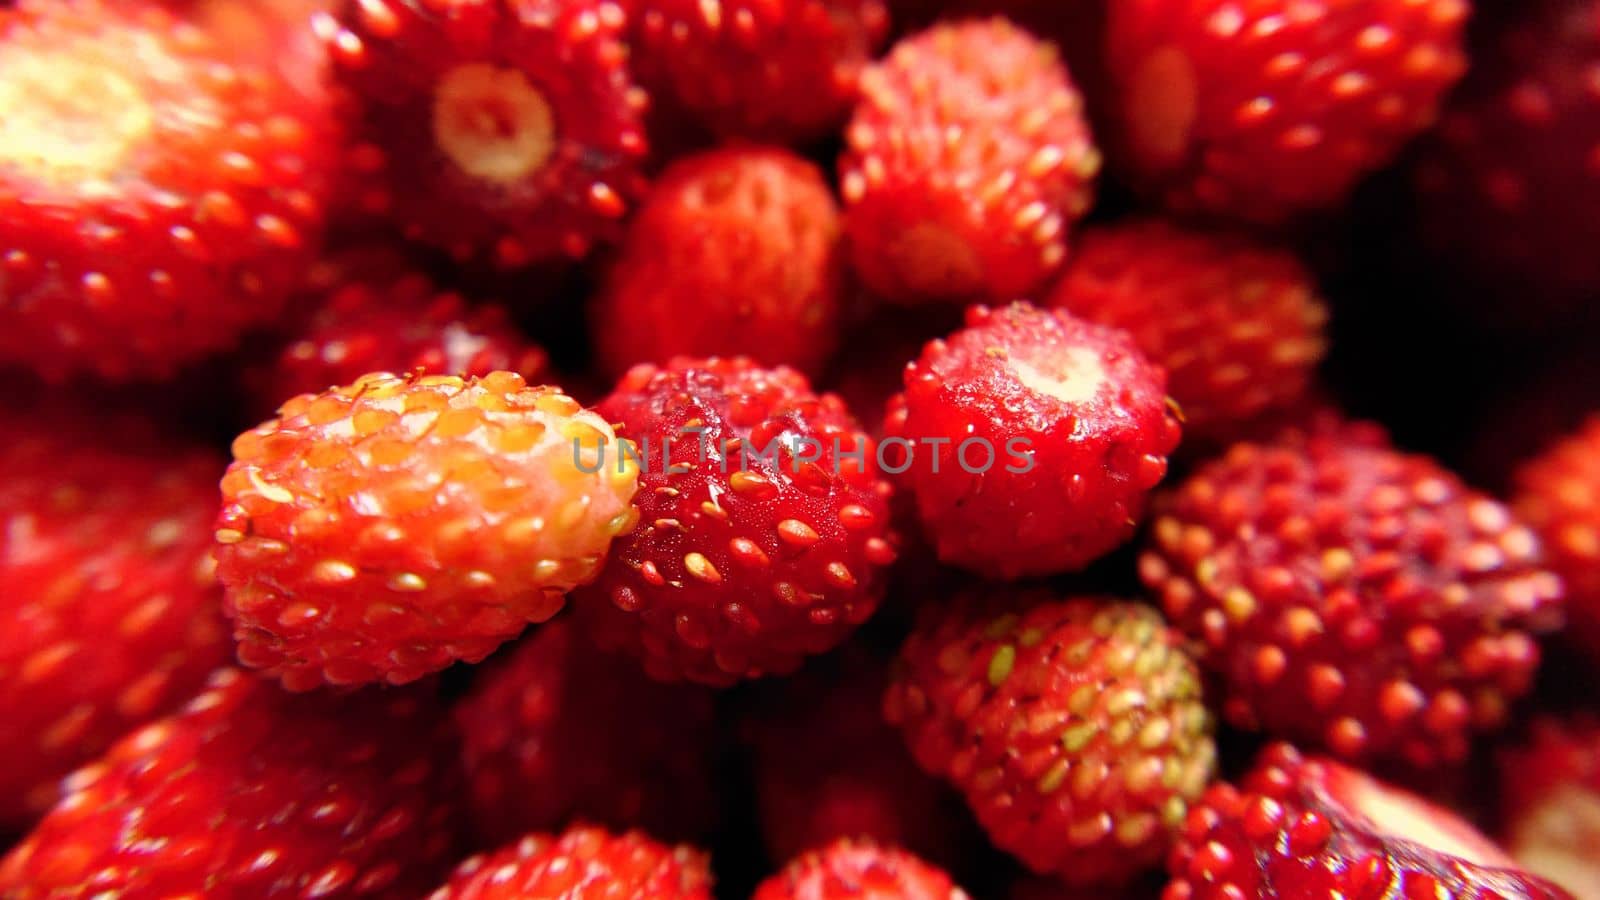 Selective focus of red forest strawberries close-up by Mastak80